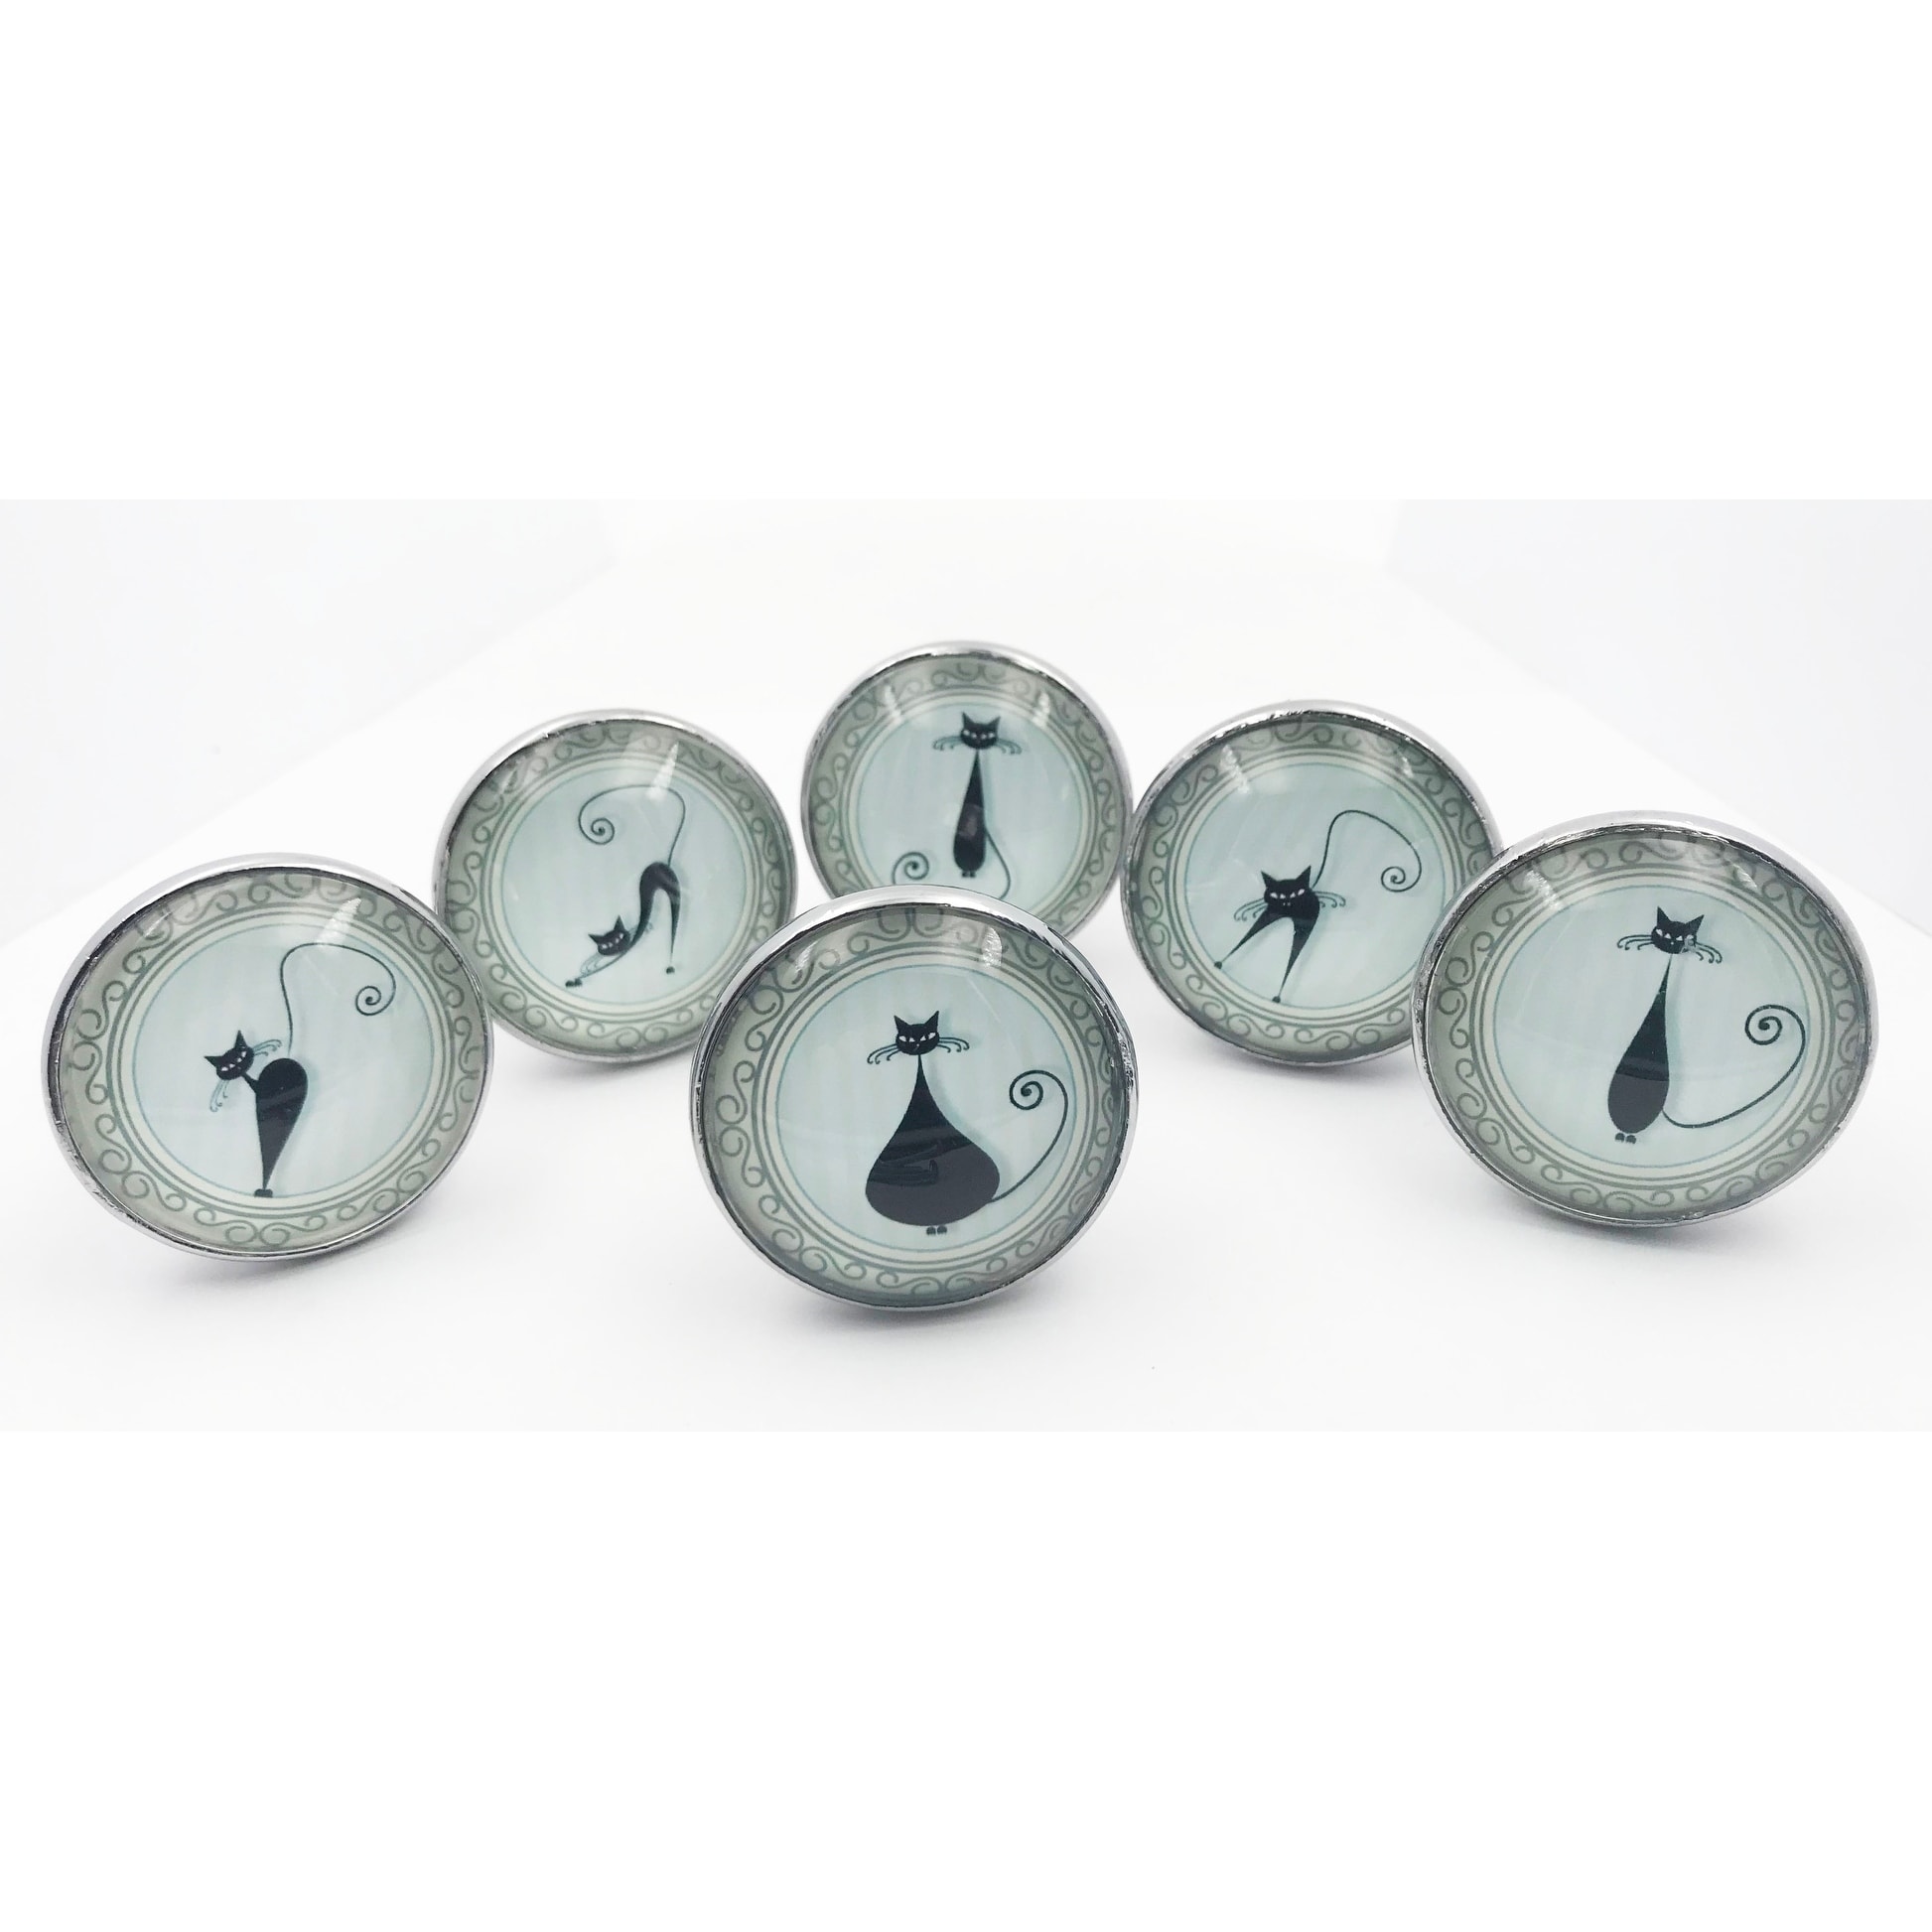 Cat Pattern Domed Glass Cabochon Pulls Knobs Pull for Cabinets Vintage Bronze Golden Silver Black  Finishes Available,HD-0109